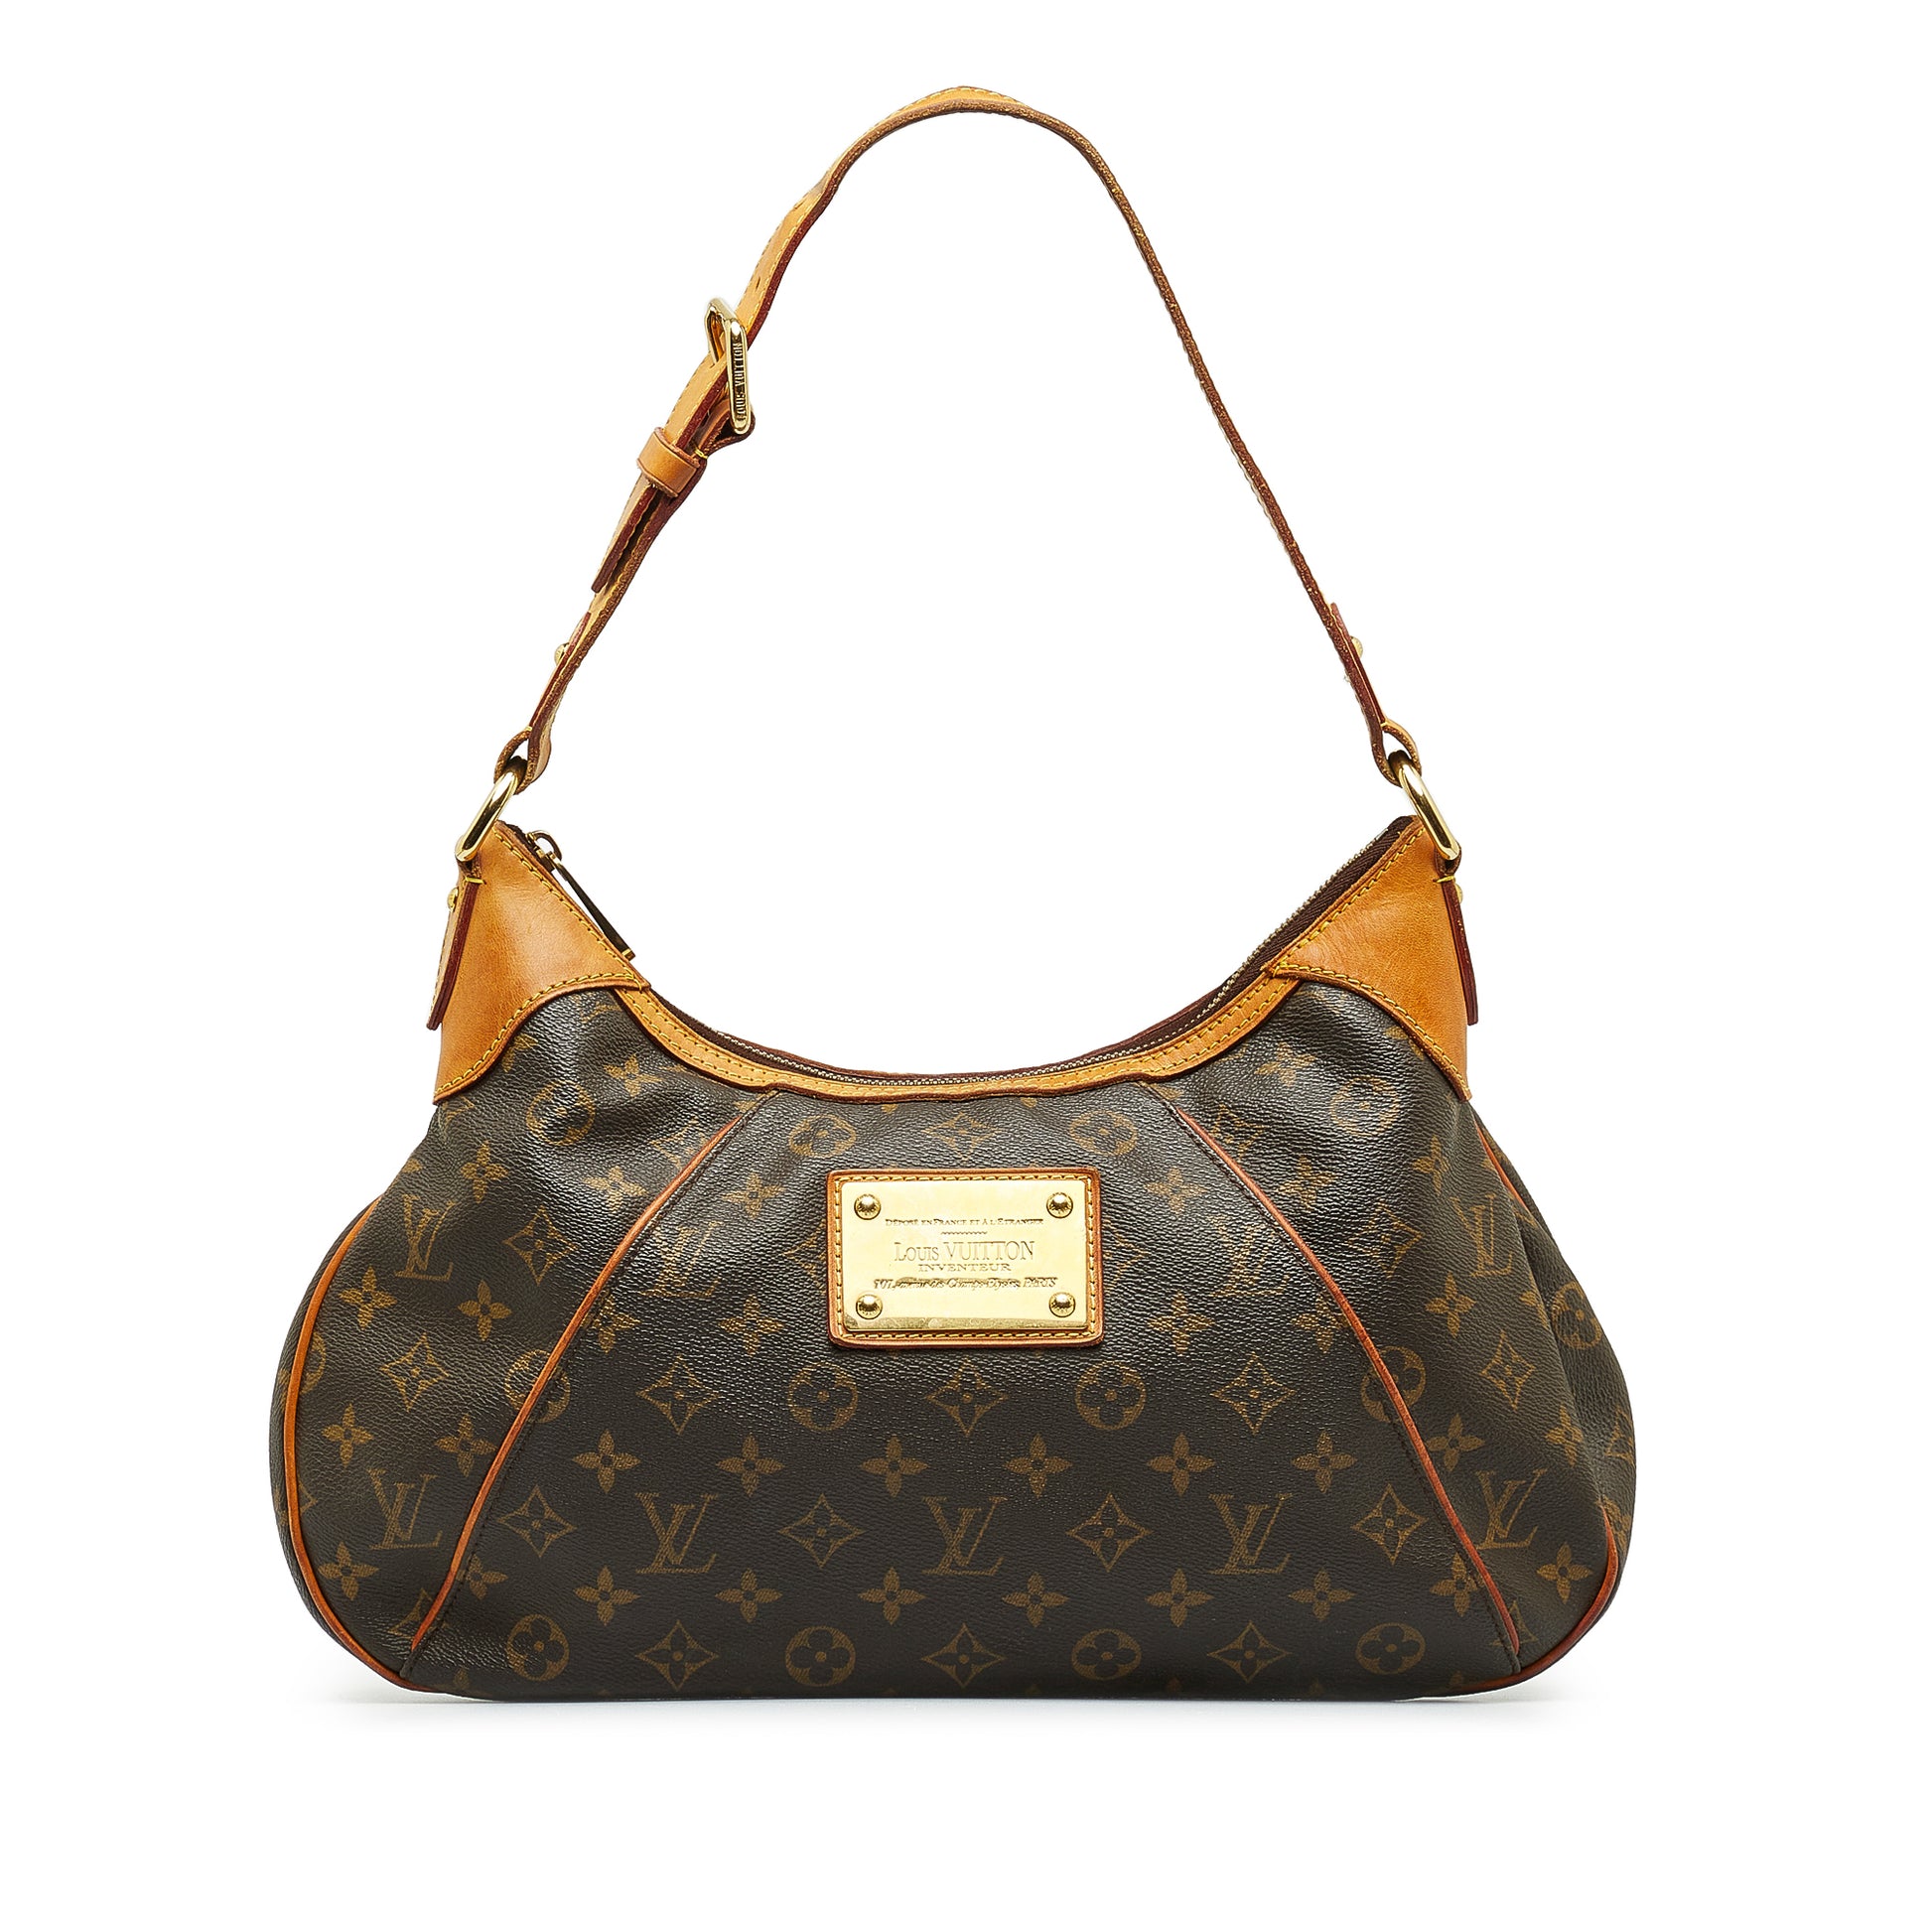 How Much Will Louis Vuitton Charge for Replacing Vachetta on Your Bag?